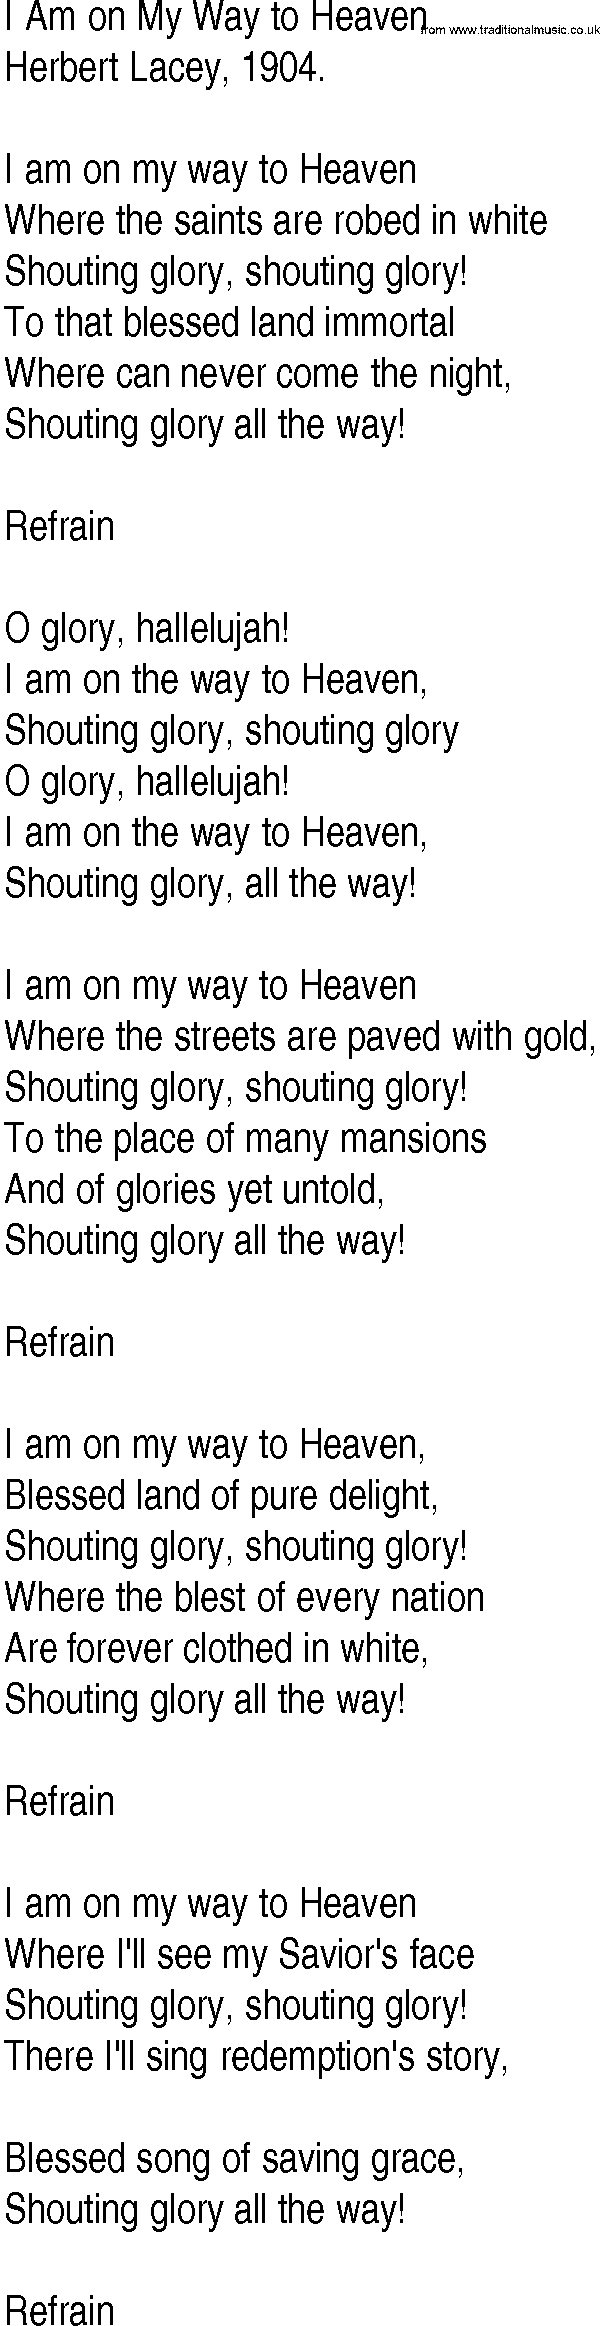 Hymn and Gospel Song Lyrics for I Am on My Way to Heaven by Herbert Lacey